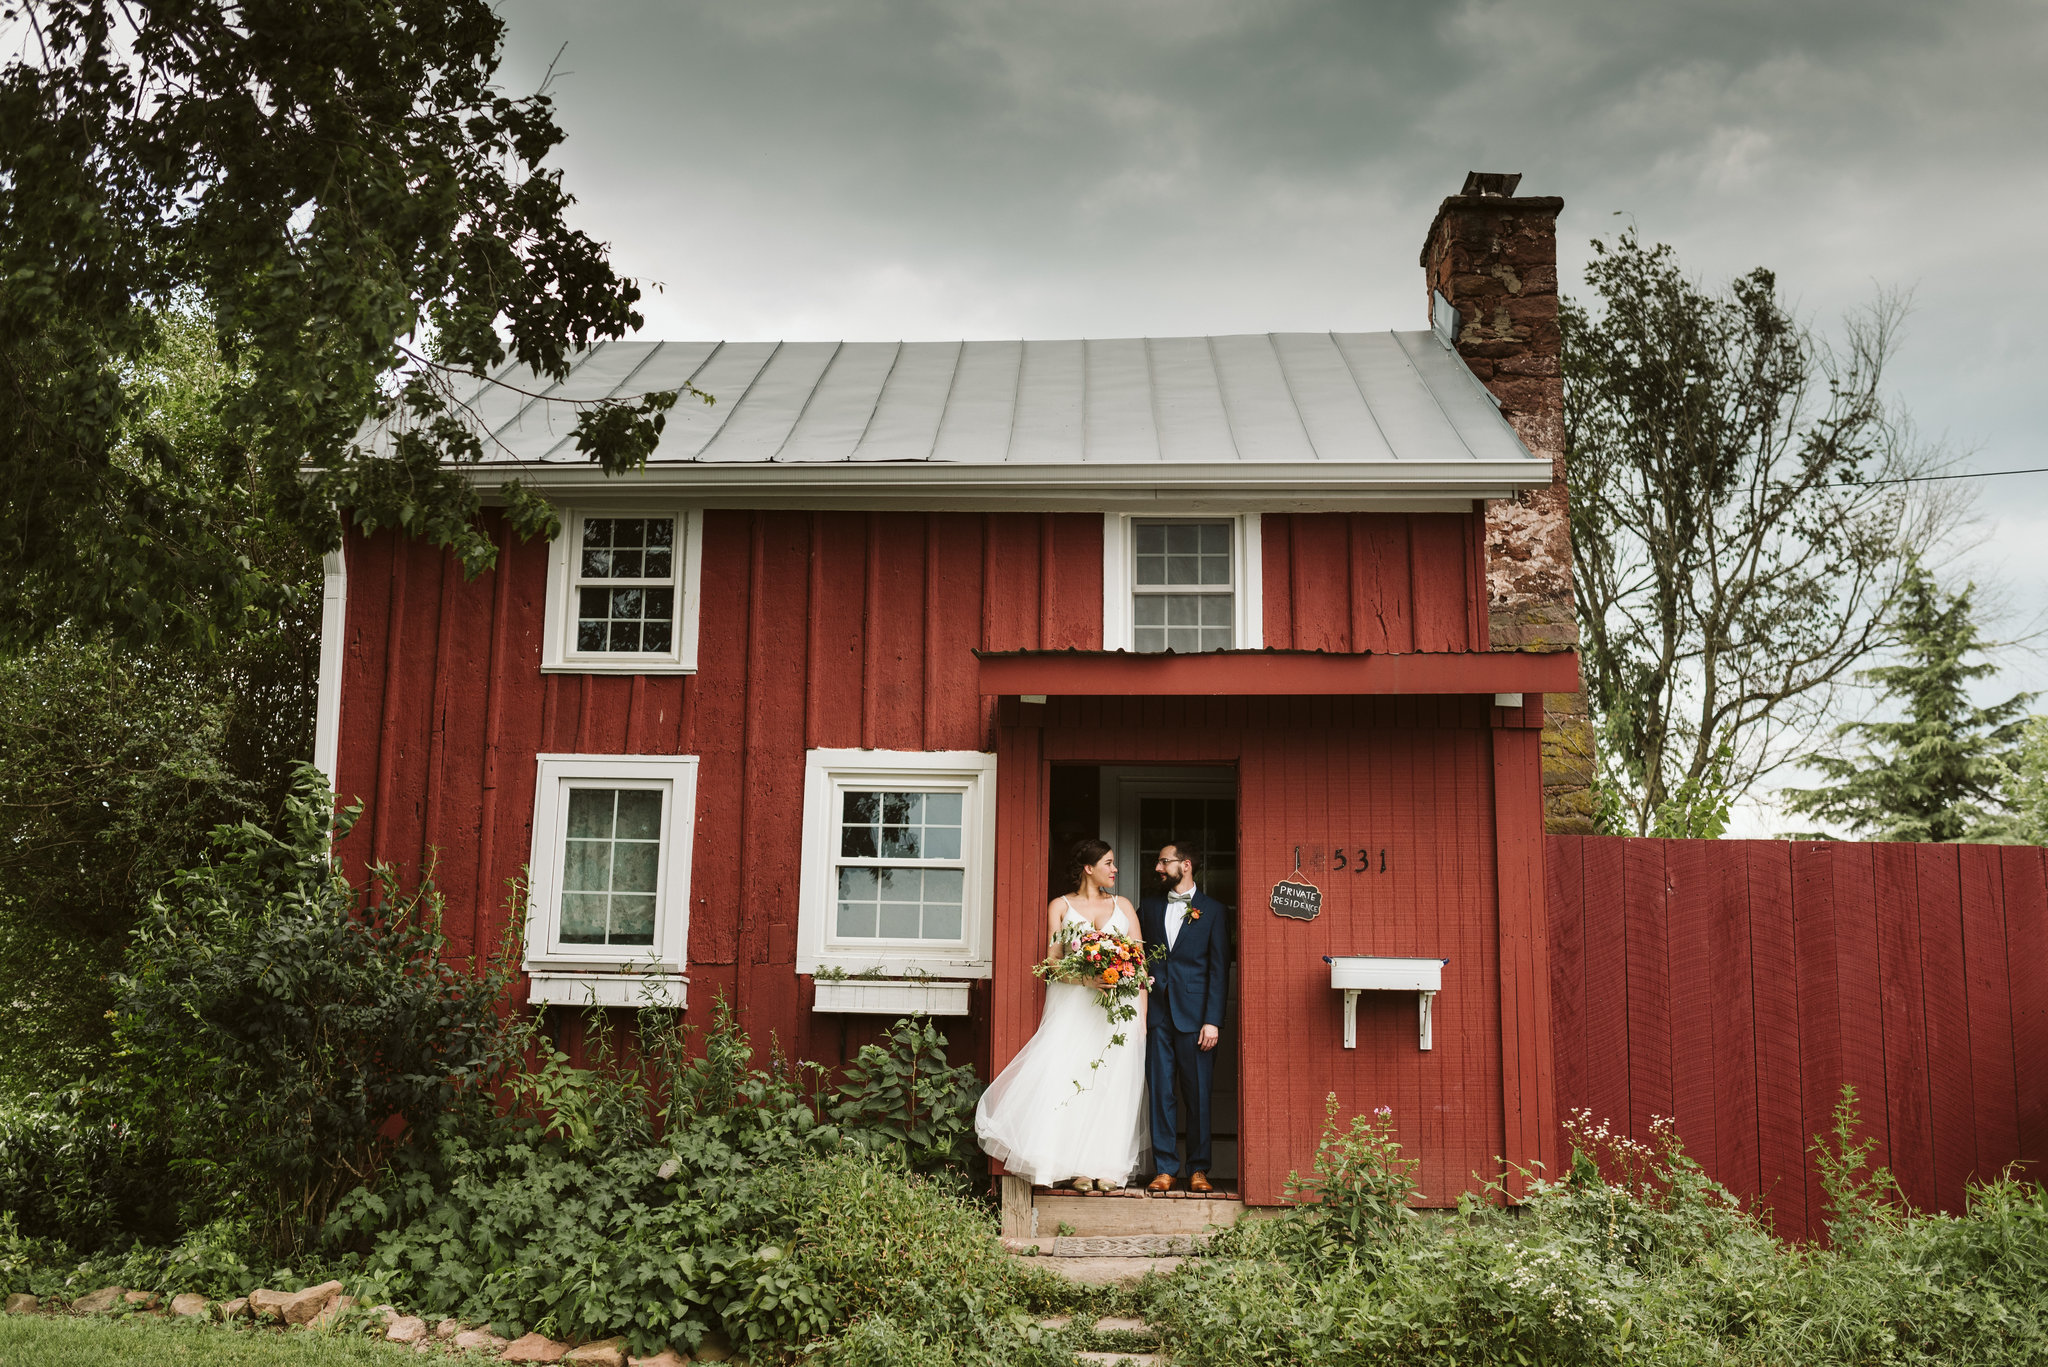 Rocklands Farm, Maryland, Intimate Wedding, Baltimore Wedding Photographer, Sungold Flower Co, Rustic, Romantic, Barn Wedding, Bride and Groom Standing in Doorway of Farmhouse